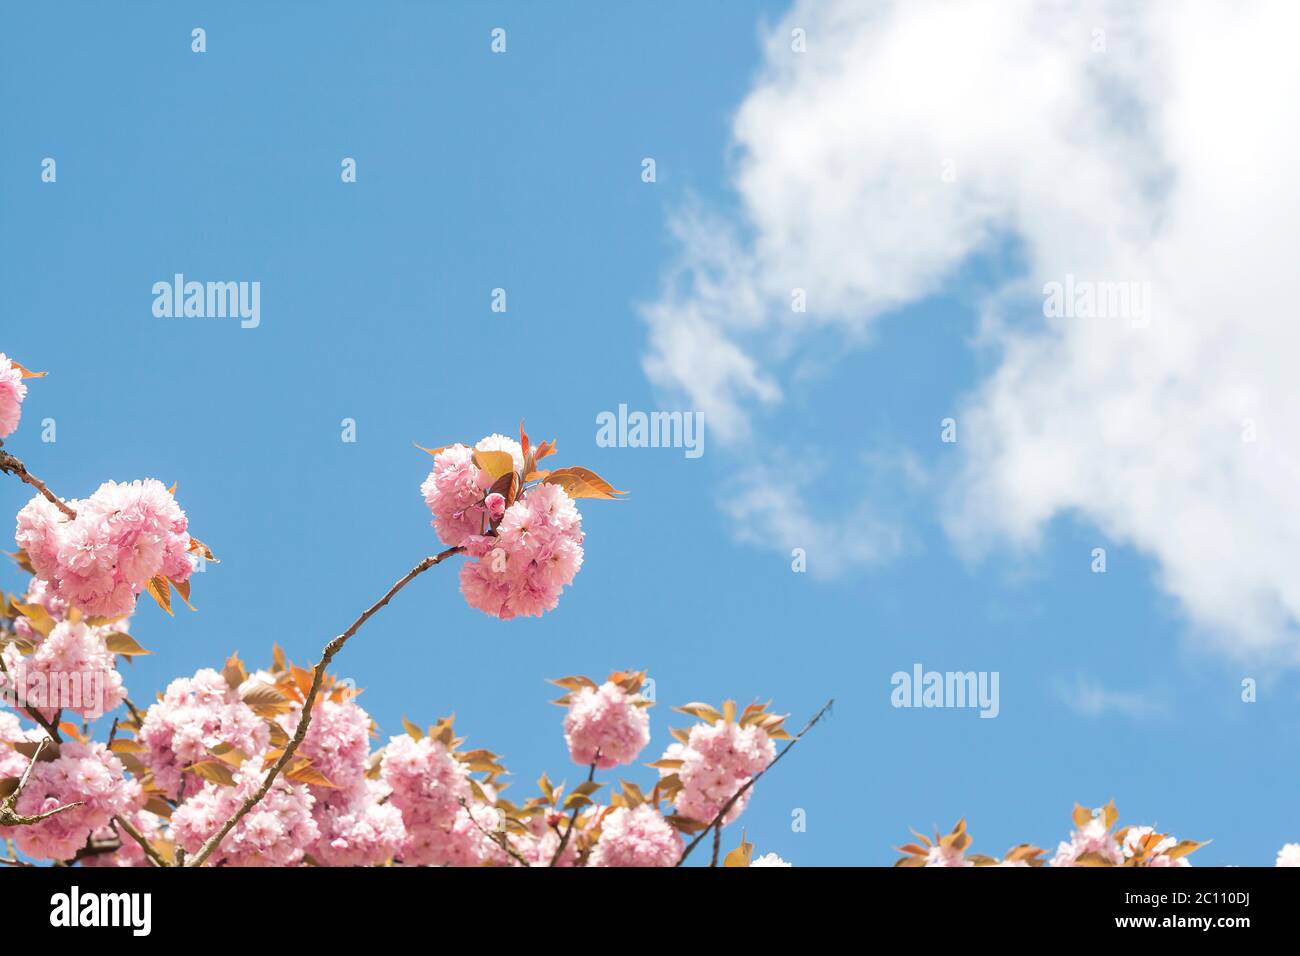 Chery tree blossom pink flowers detail Stock Photo